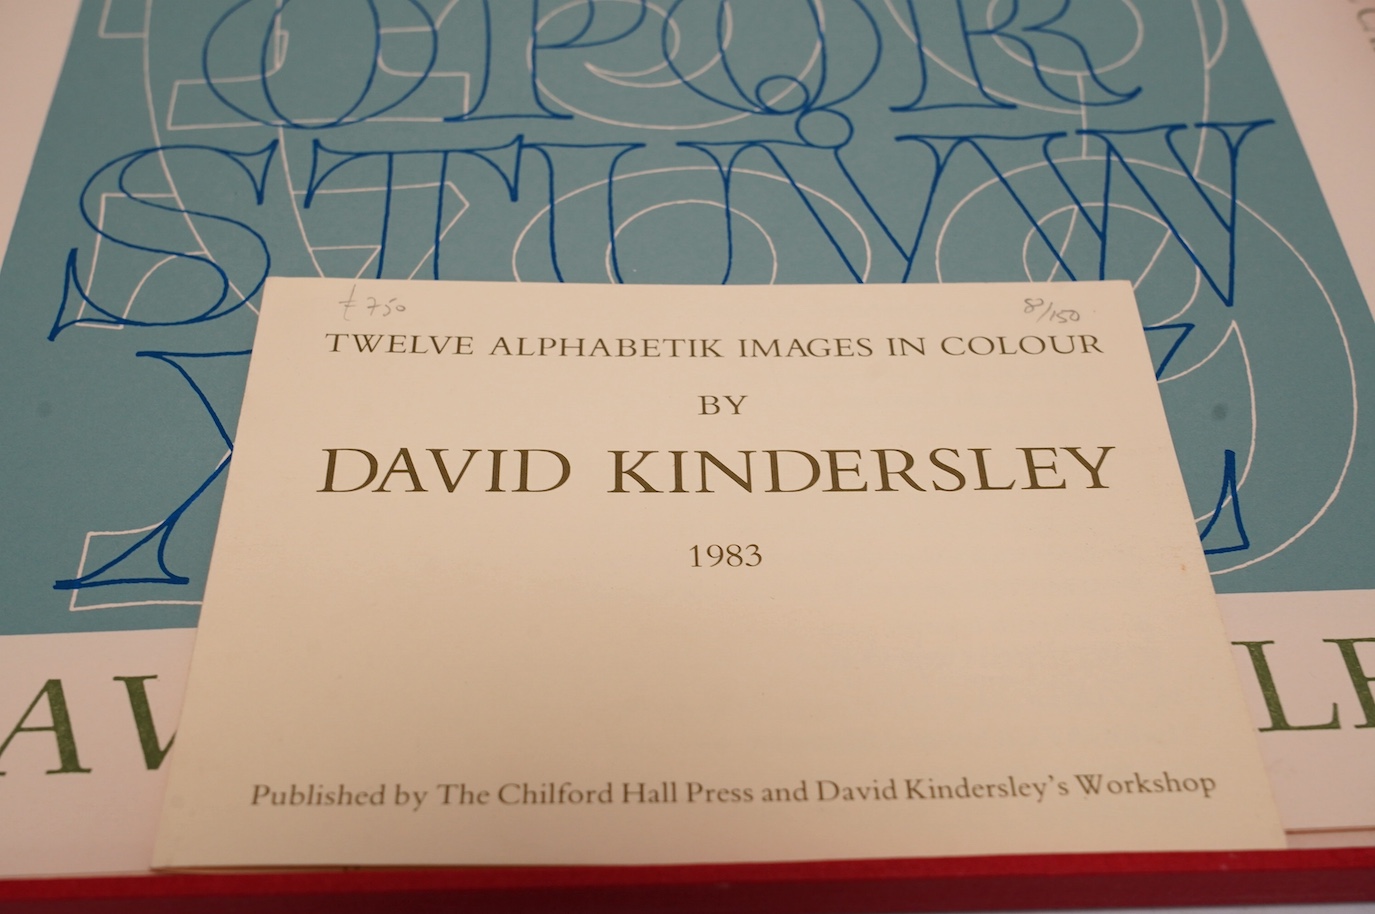 David Kindersley (1915-1995), folio of twelve alphabetik images in colour, 1983, limited edition 8/150, published by the Chilford Hall Press and David Kindersley's Workshop, 45 x 35cm, unframed. Condition - good